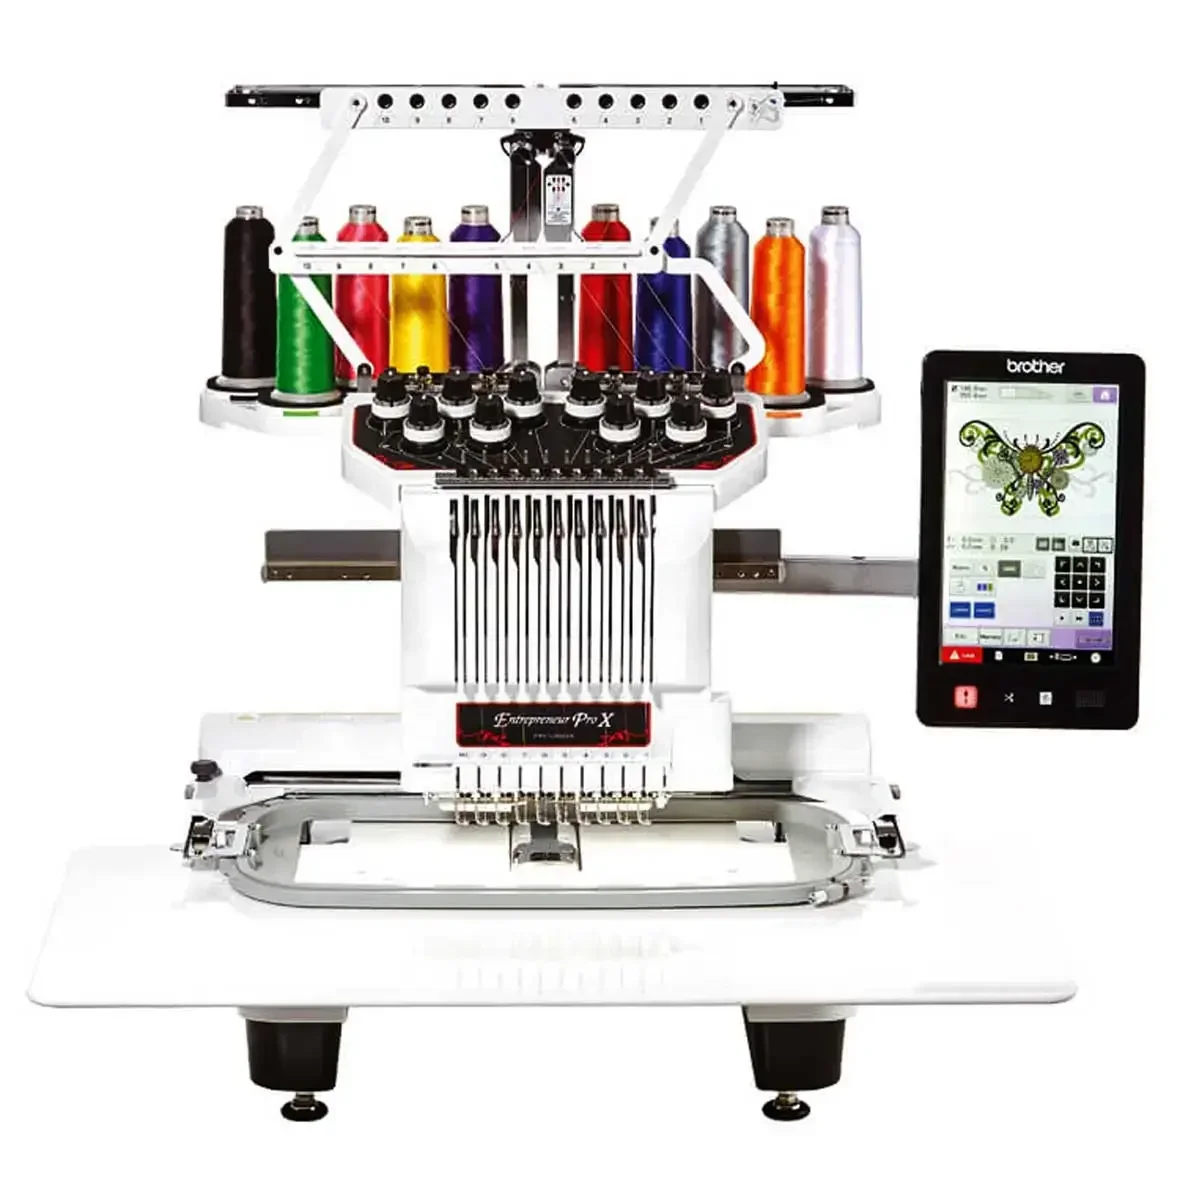 

SUMMER SALES DISCOUNT ON AUTHENTIC ON BROTHER PR1050X Commercial Embroidery Machine PR1050X 10-Needle Home Embroidery Machine